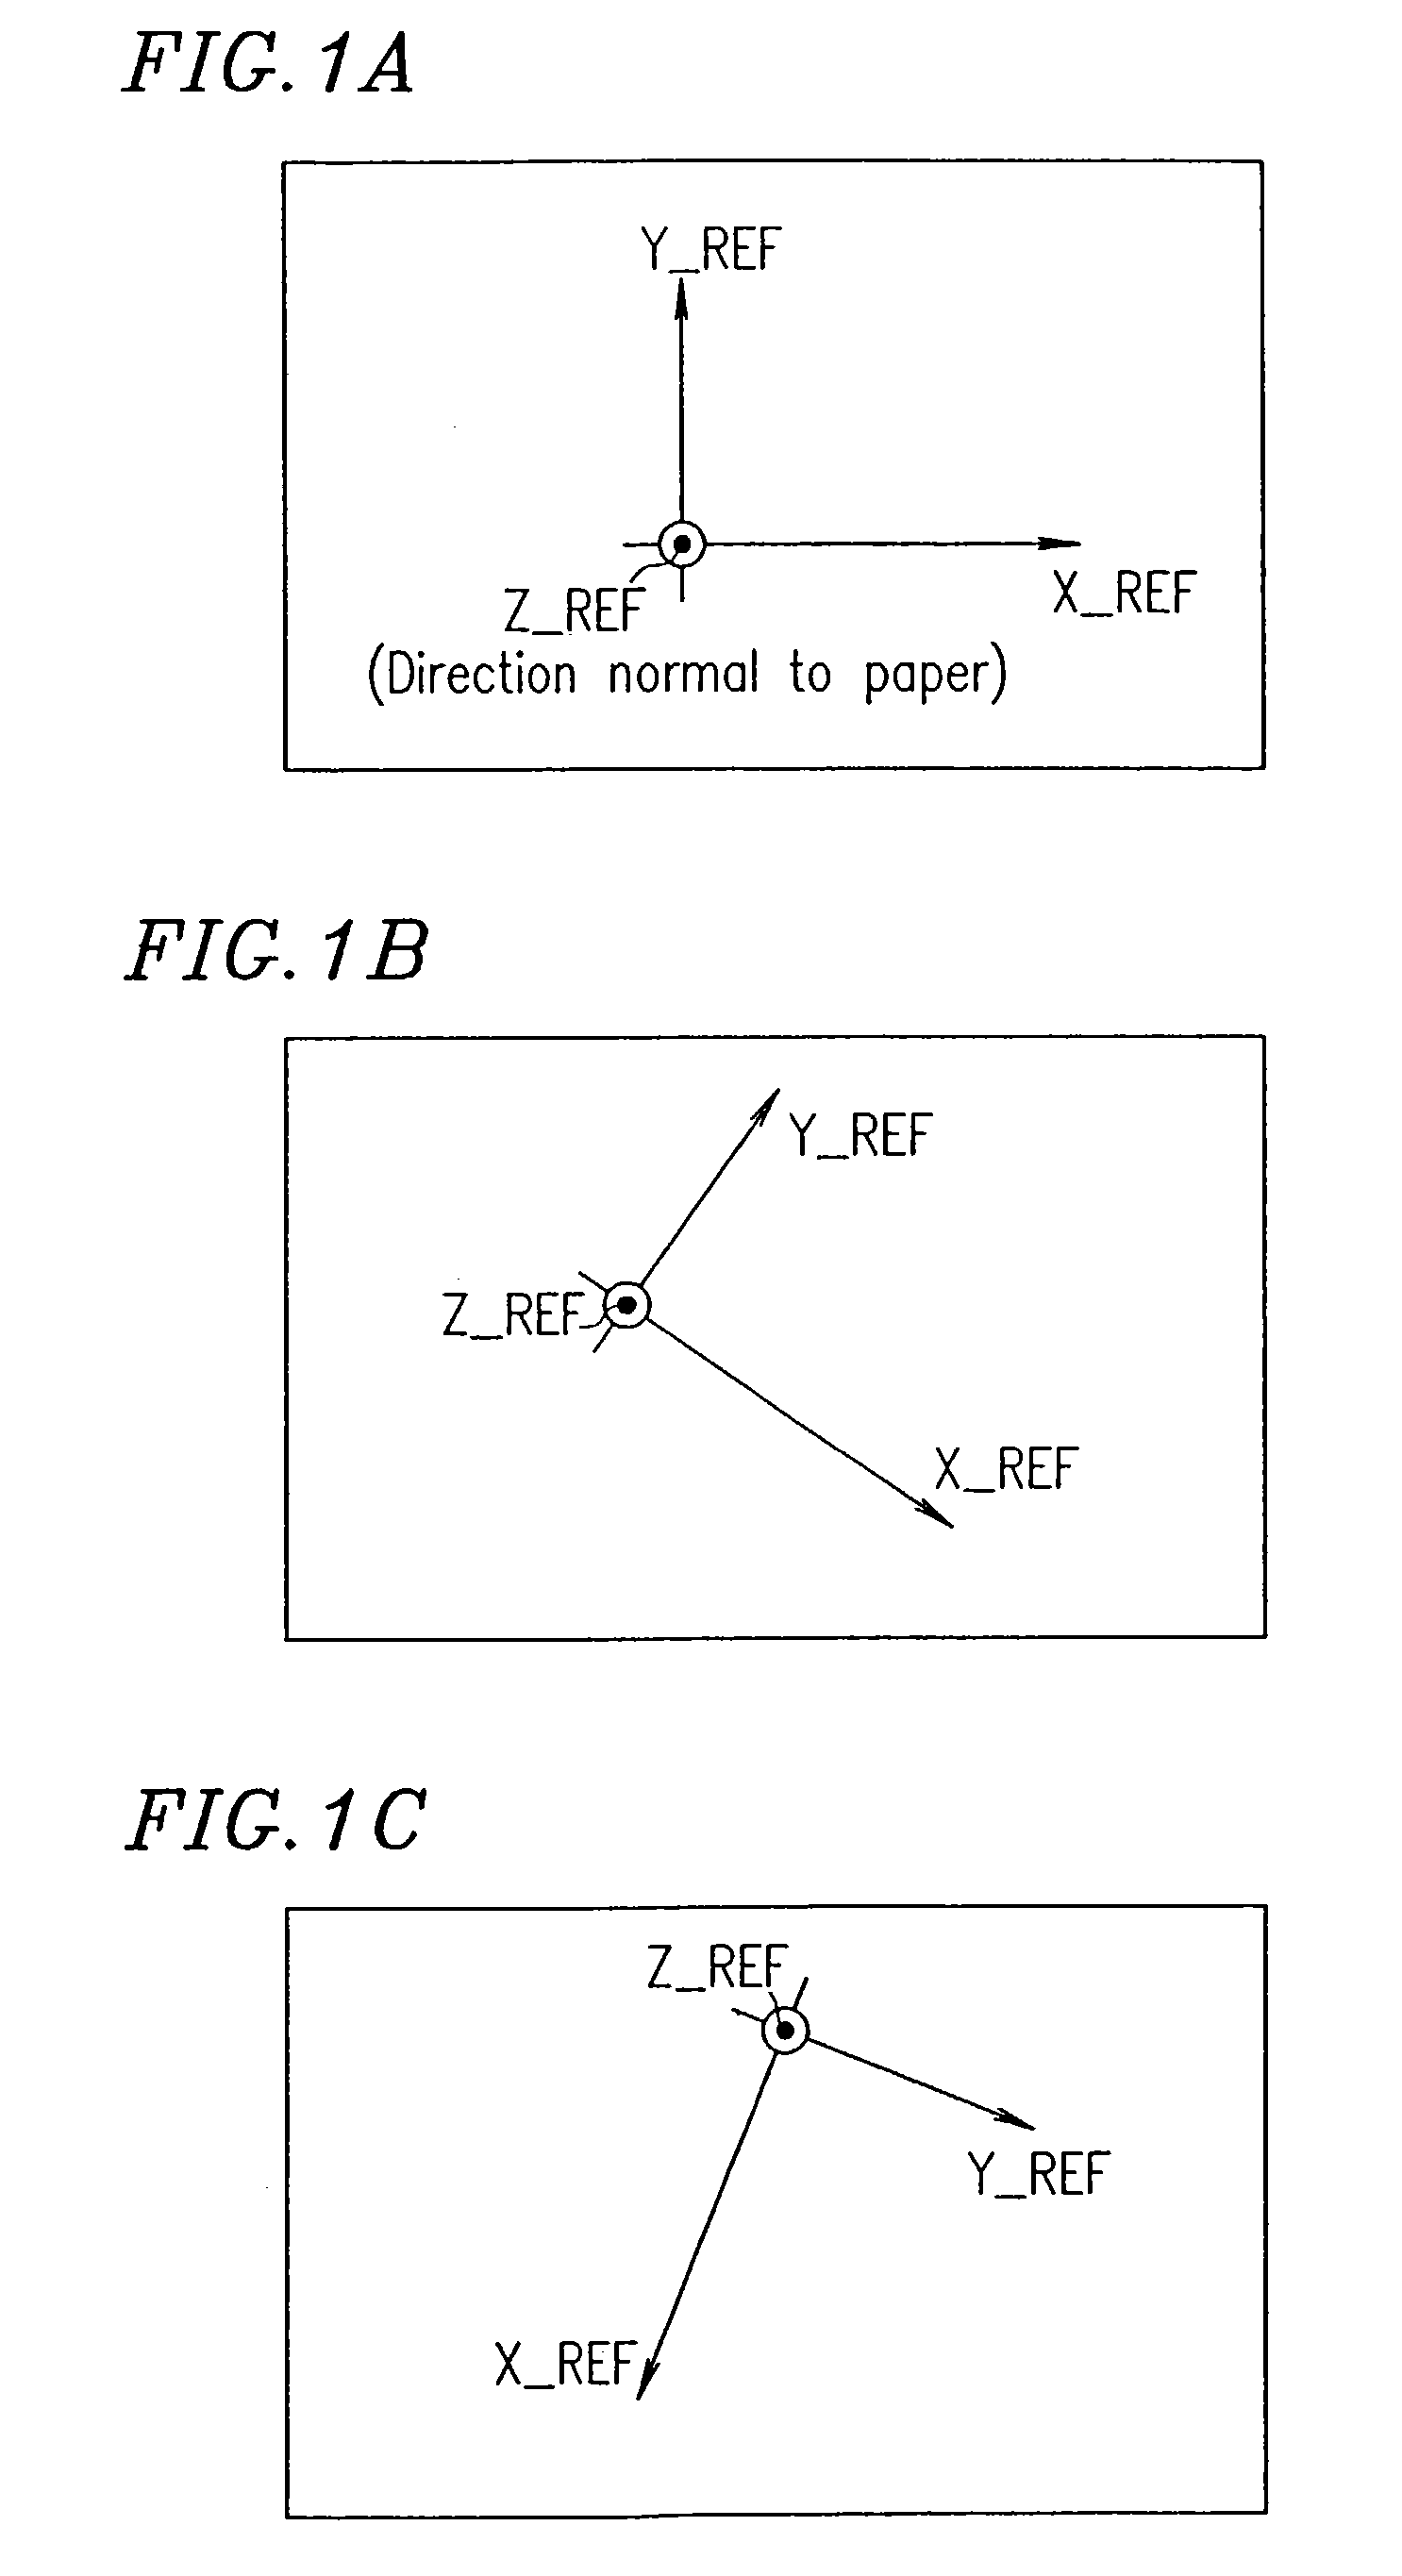 Nematic liquid crystal display device with multi-domain pixels and six phase difference compensators